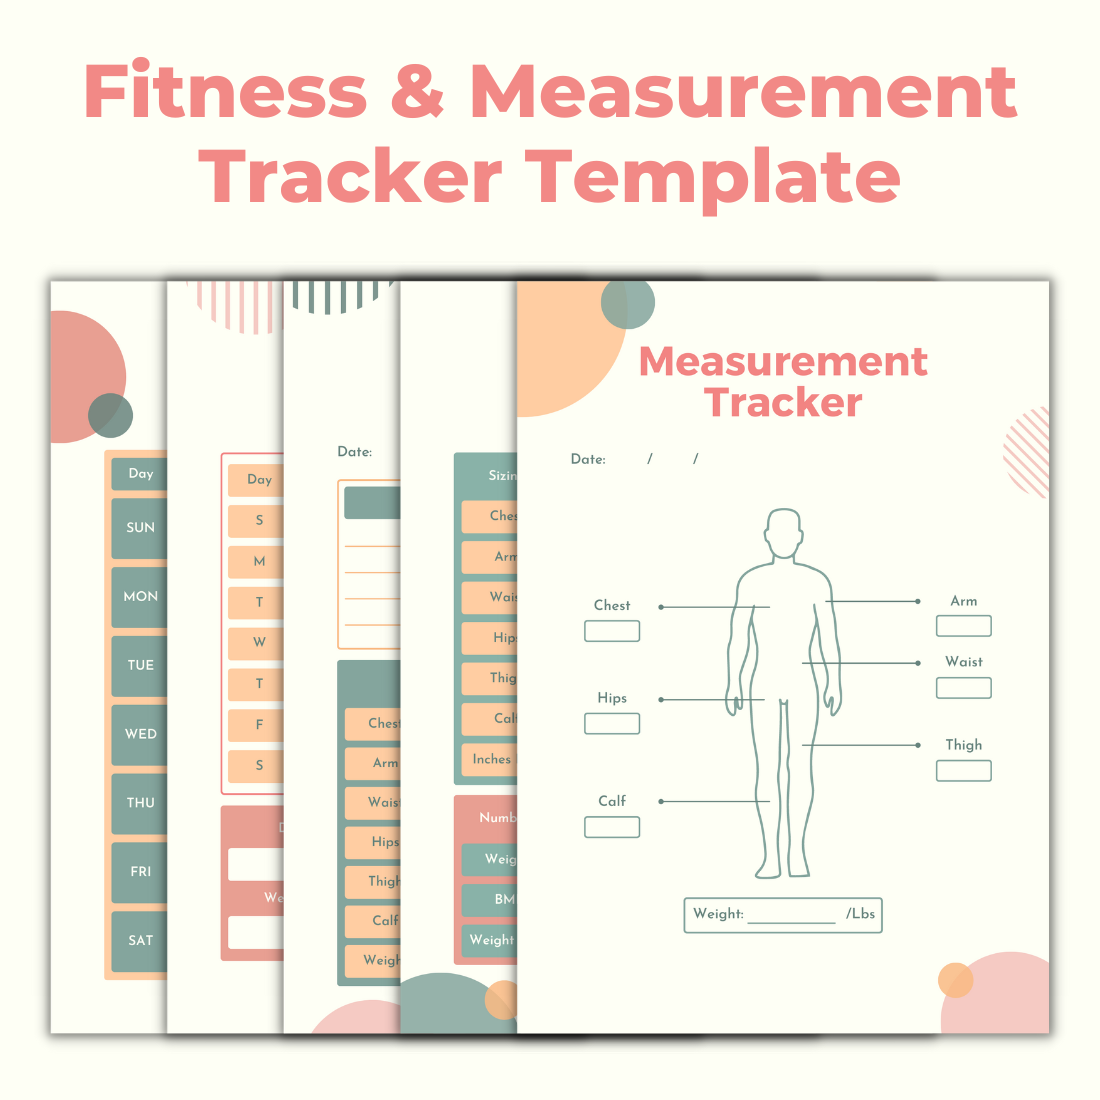 Fitness and Measurement Tracker Canva Template cover image.